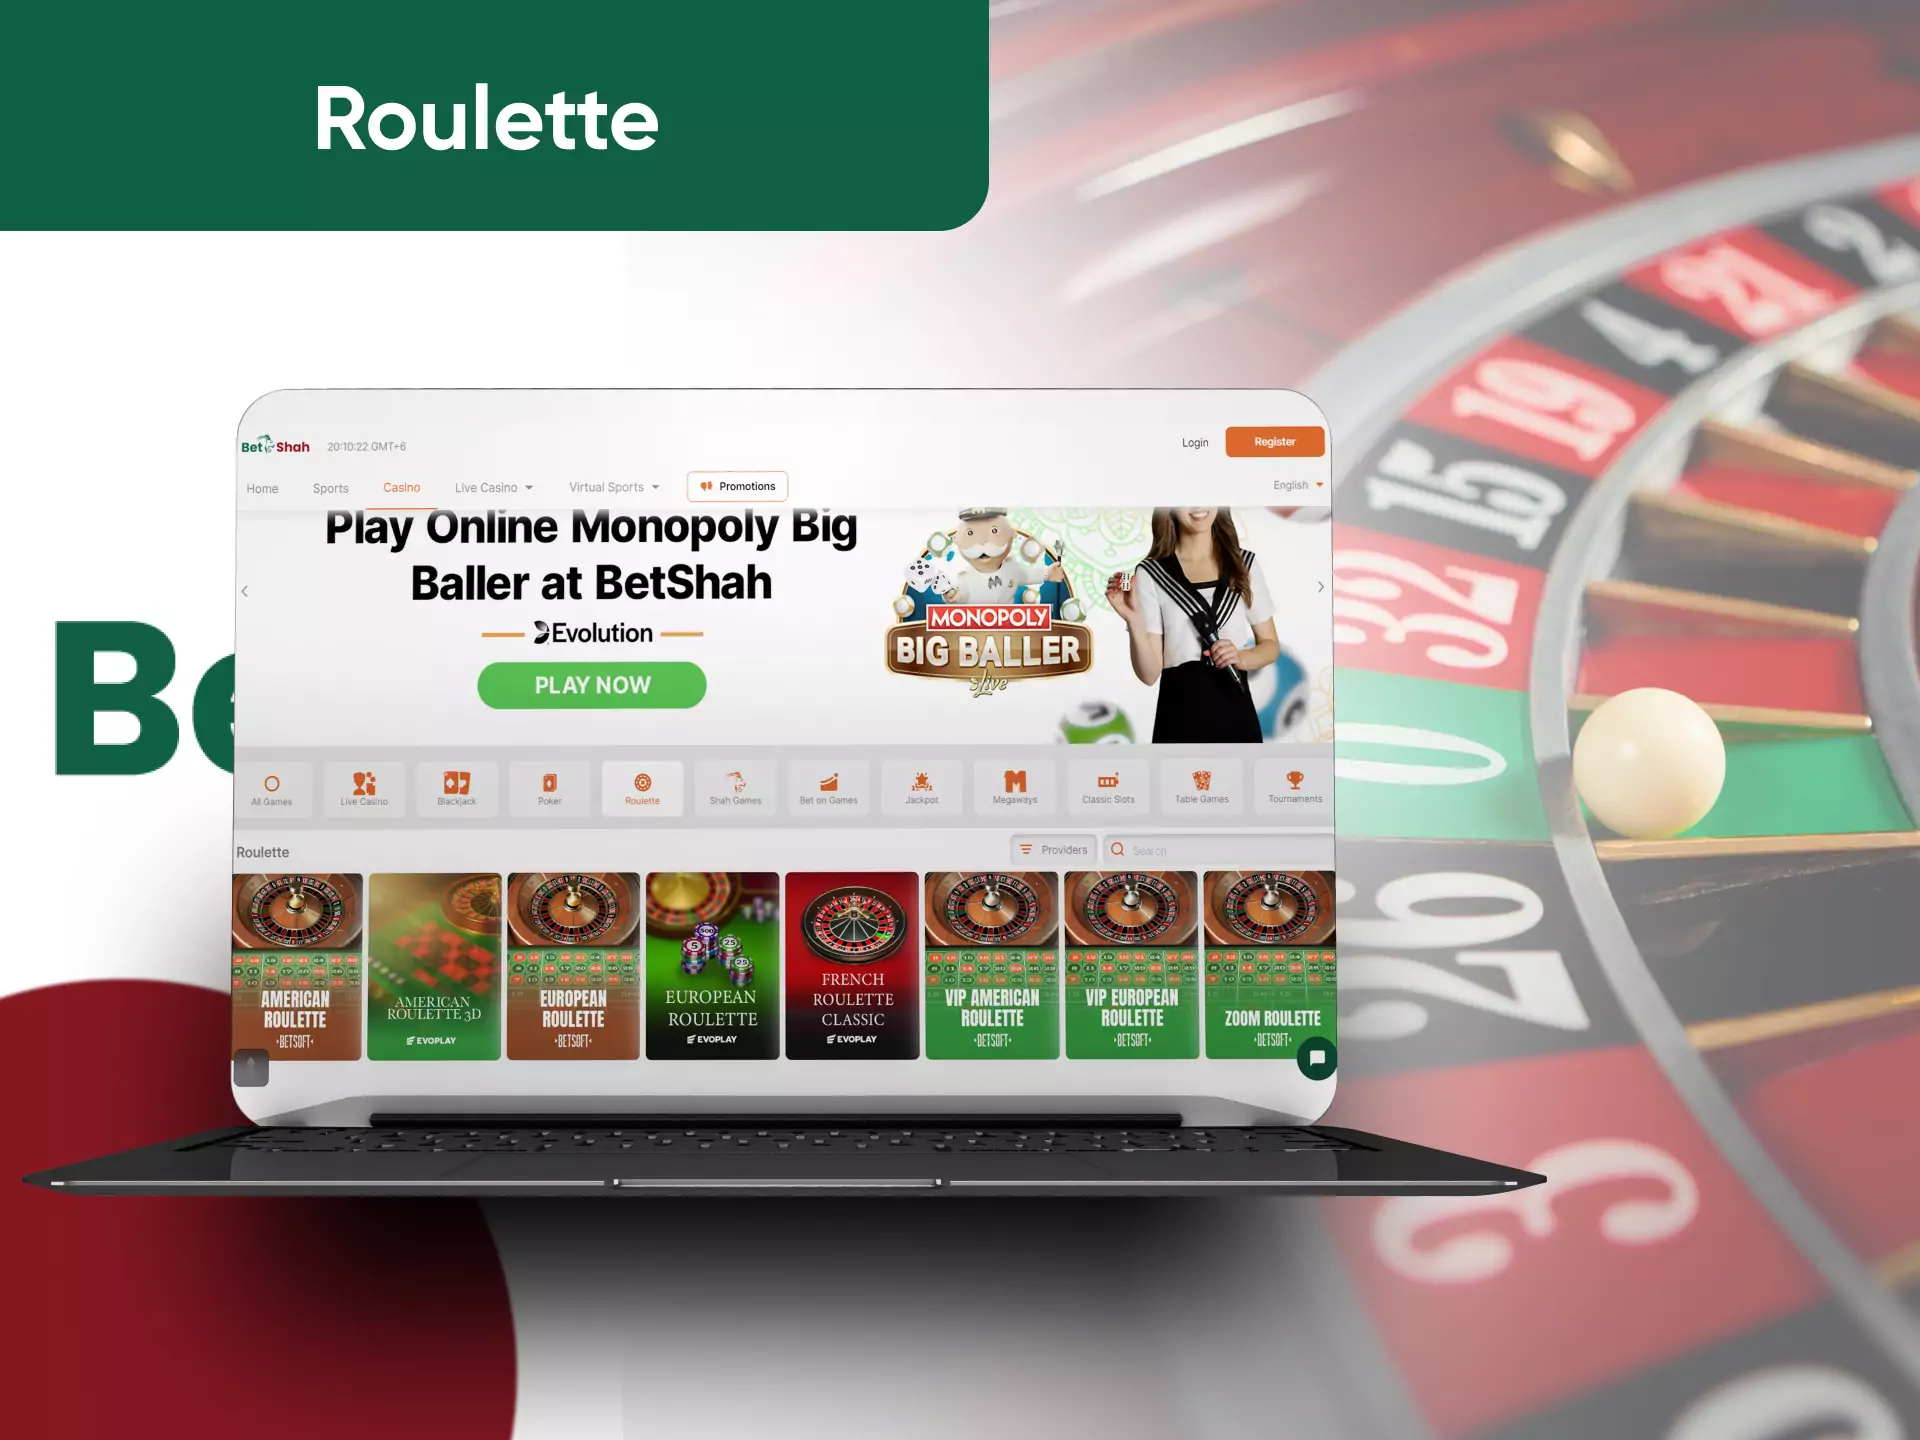 On Betshah, you can play different types of online roulette.